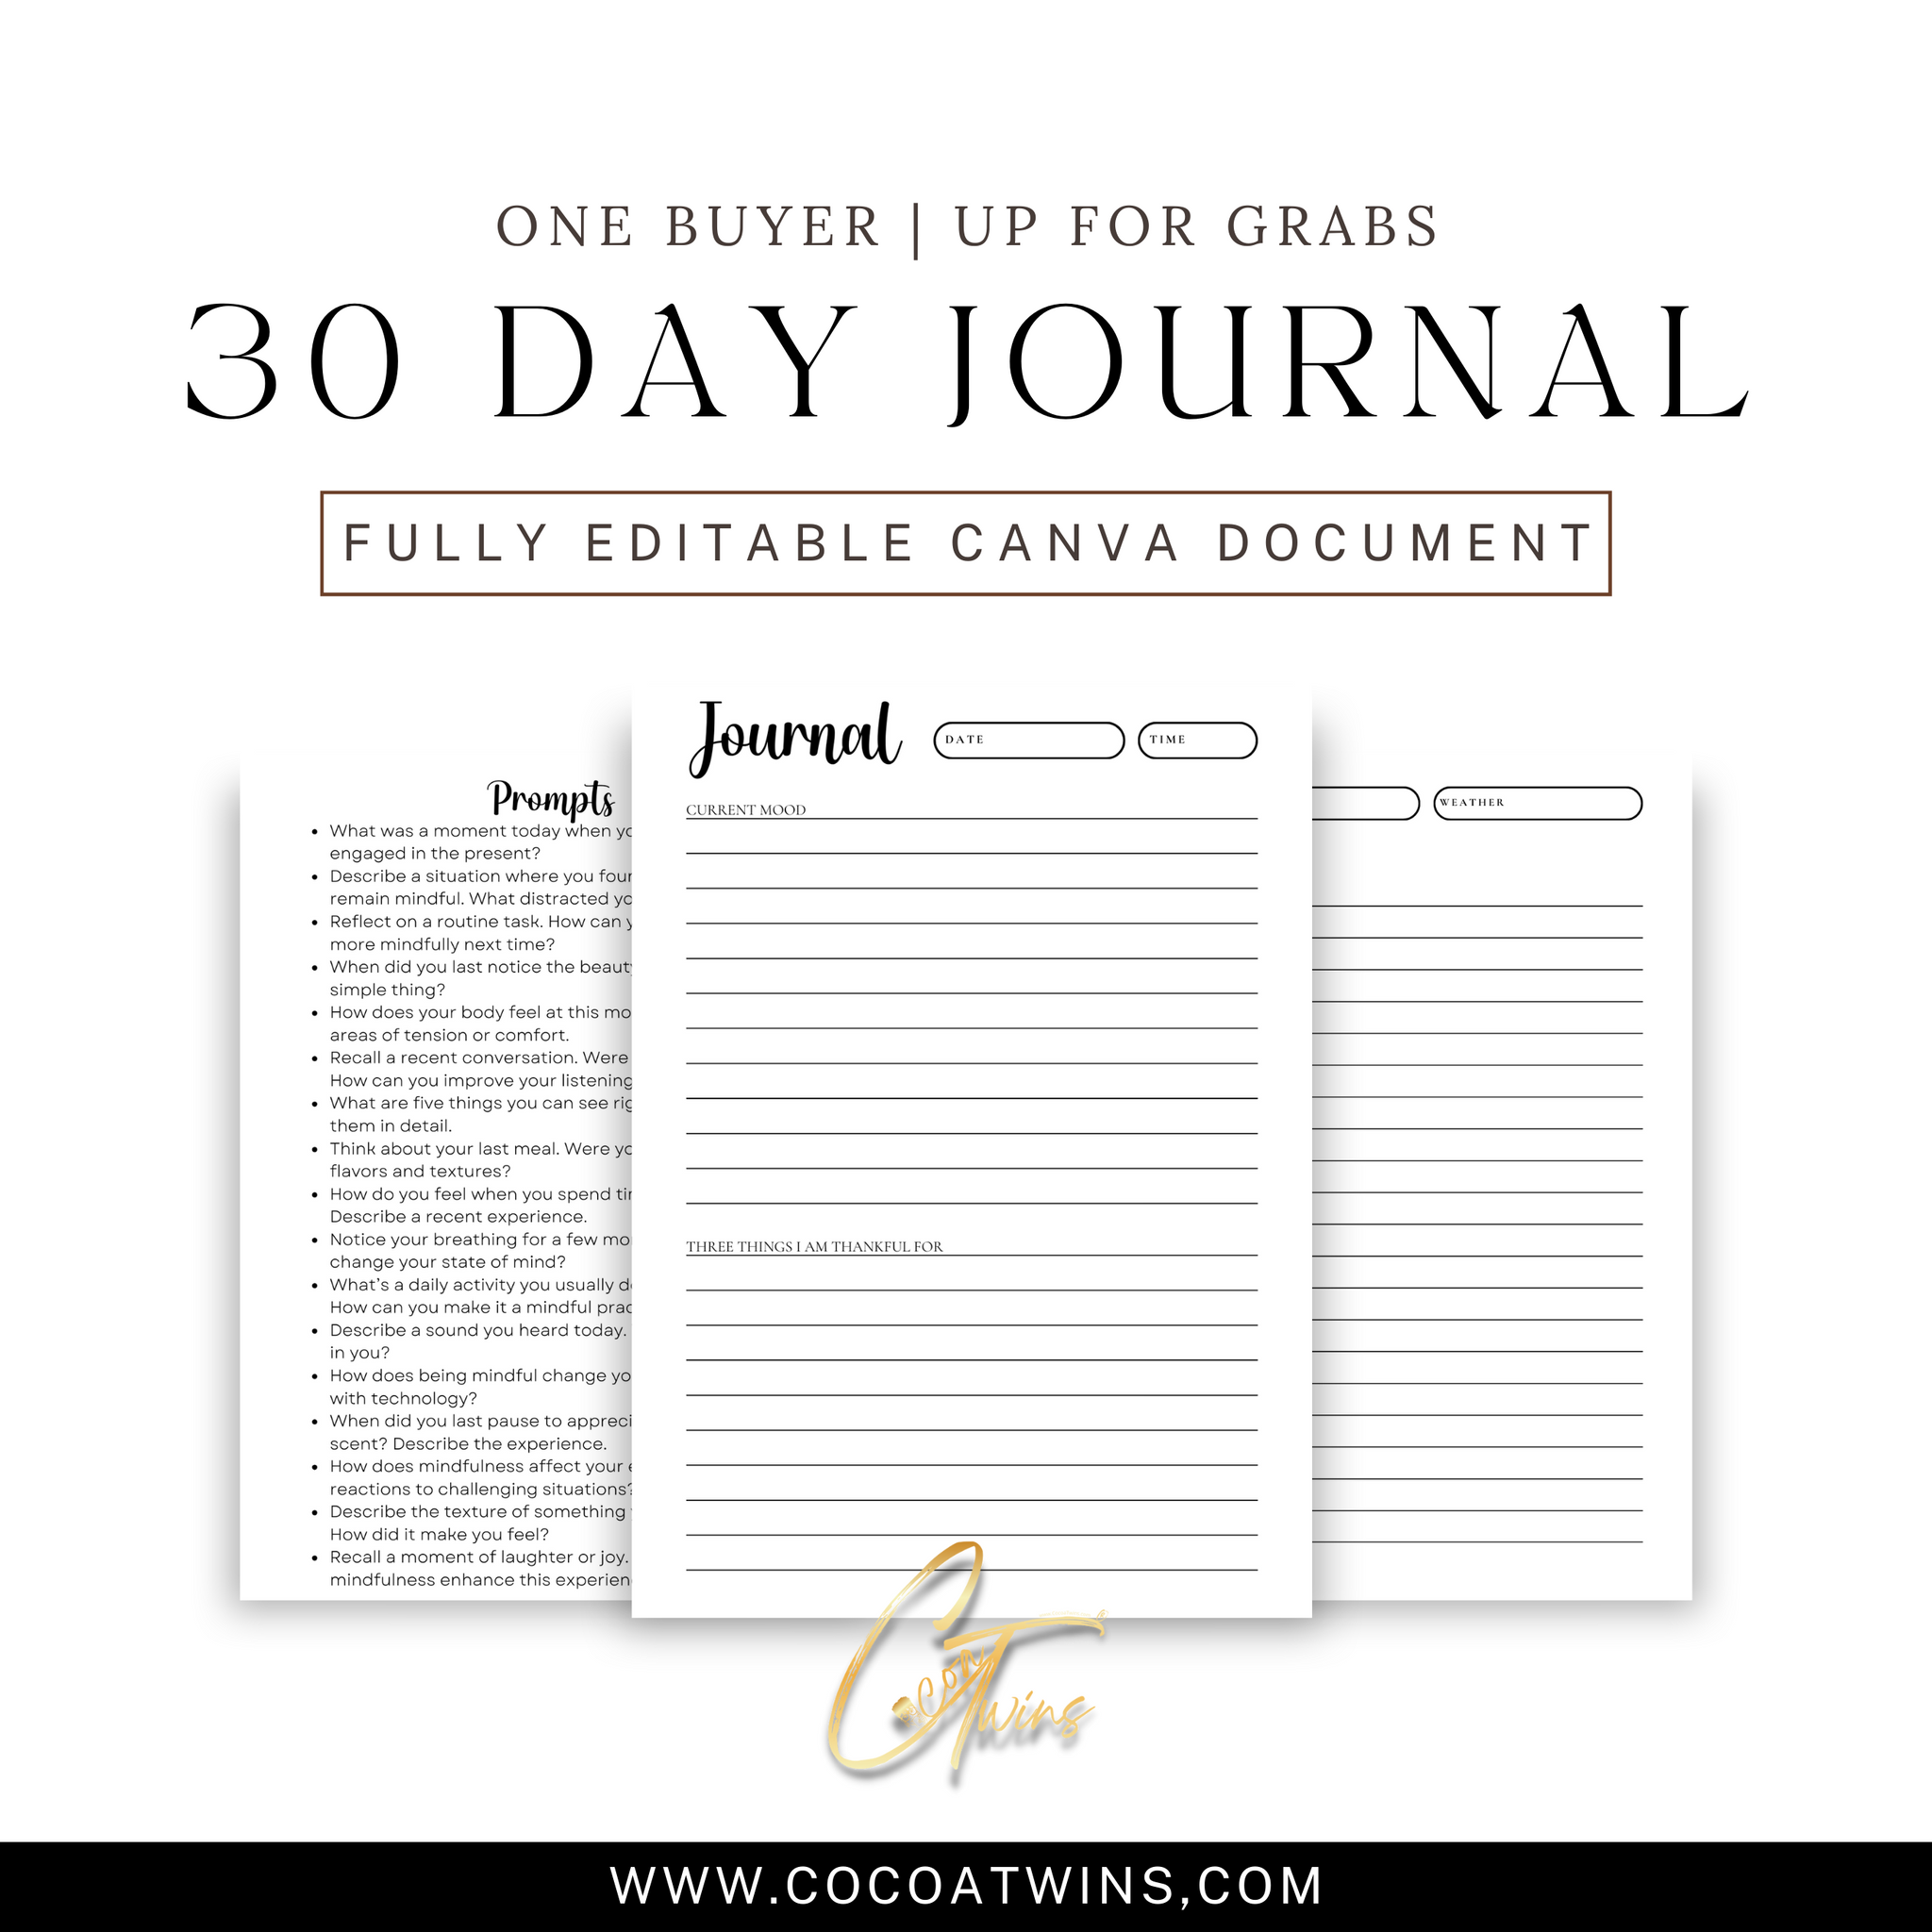 Mindful Moments - Cultivating Presence and Peace - EB | One Buyer 30 Day Prompt Journal